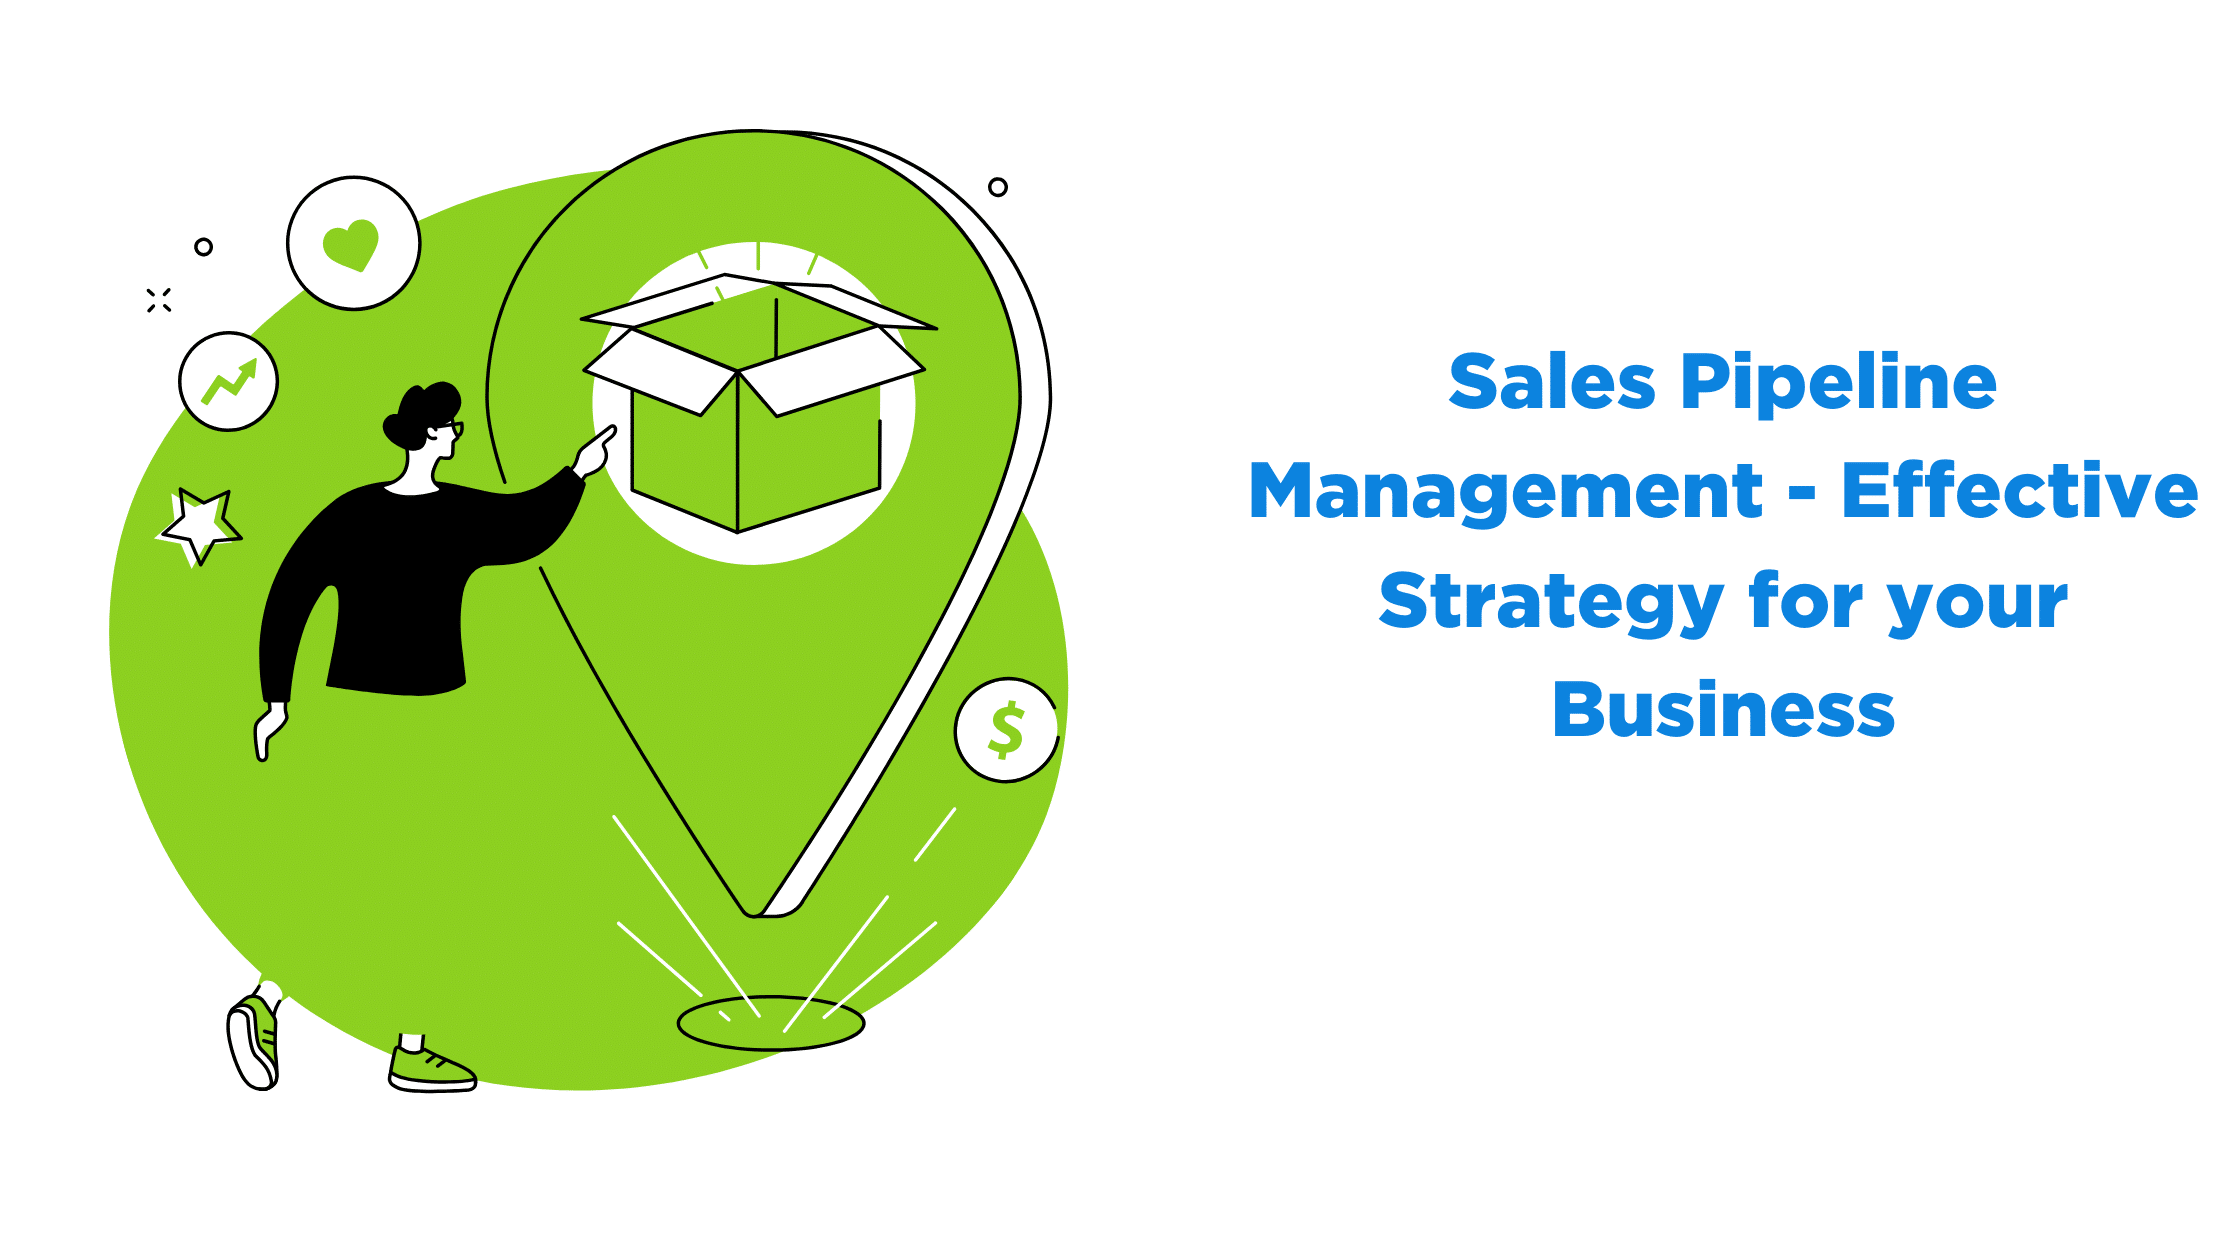 Sales Pipeline Management - Effective Strategy for your Business